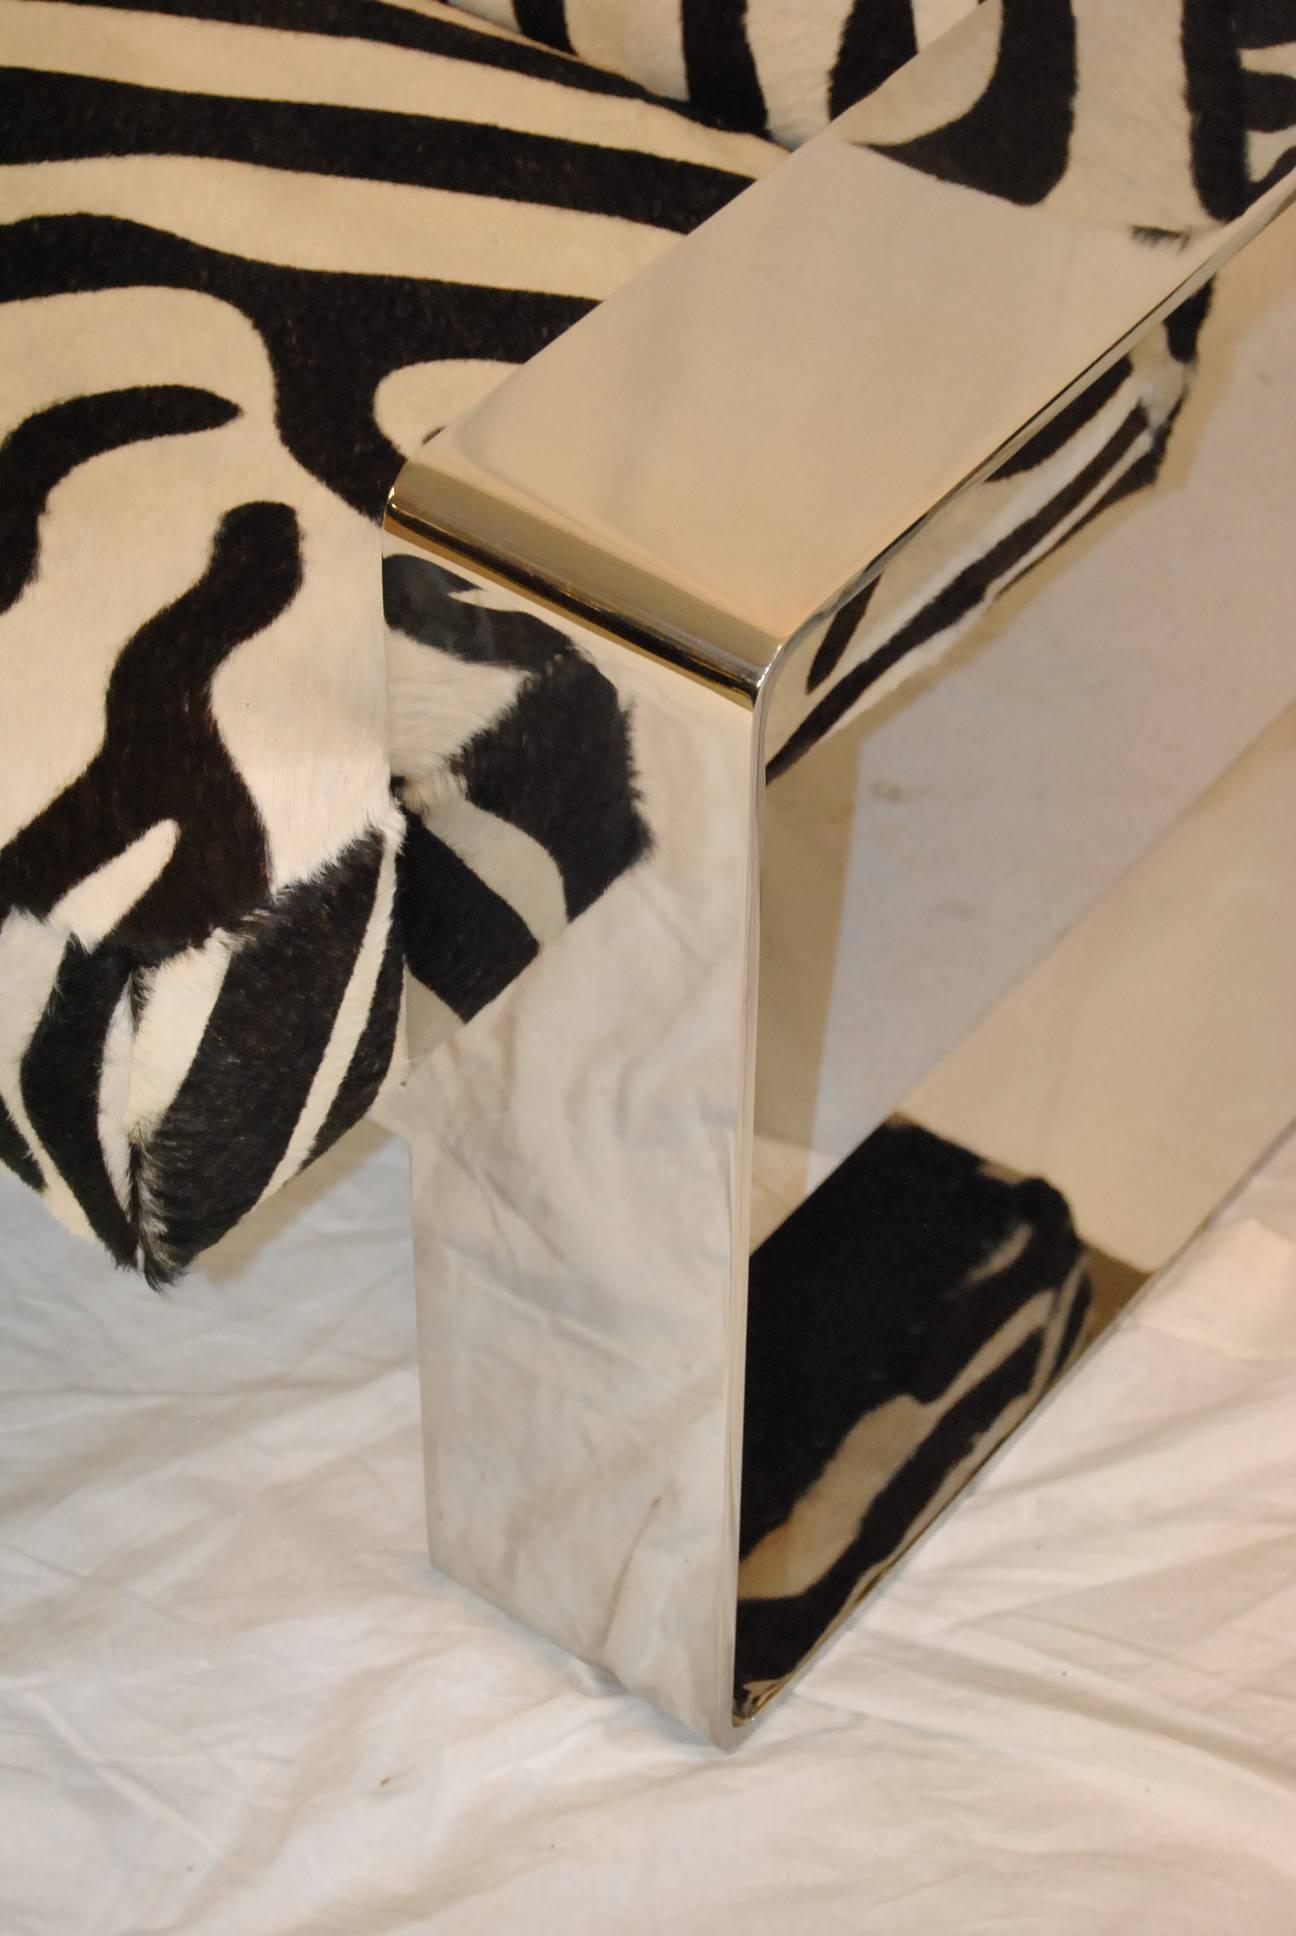 Pair of Connor Chairs with Chrome Frame and Zebra Print Cowhide Upholstery 1